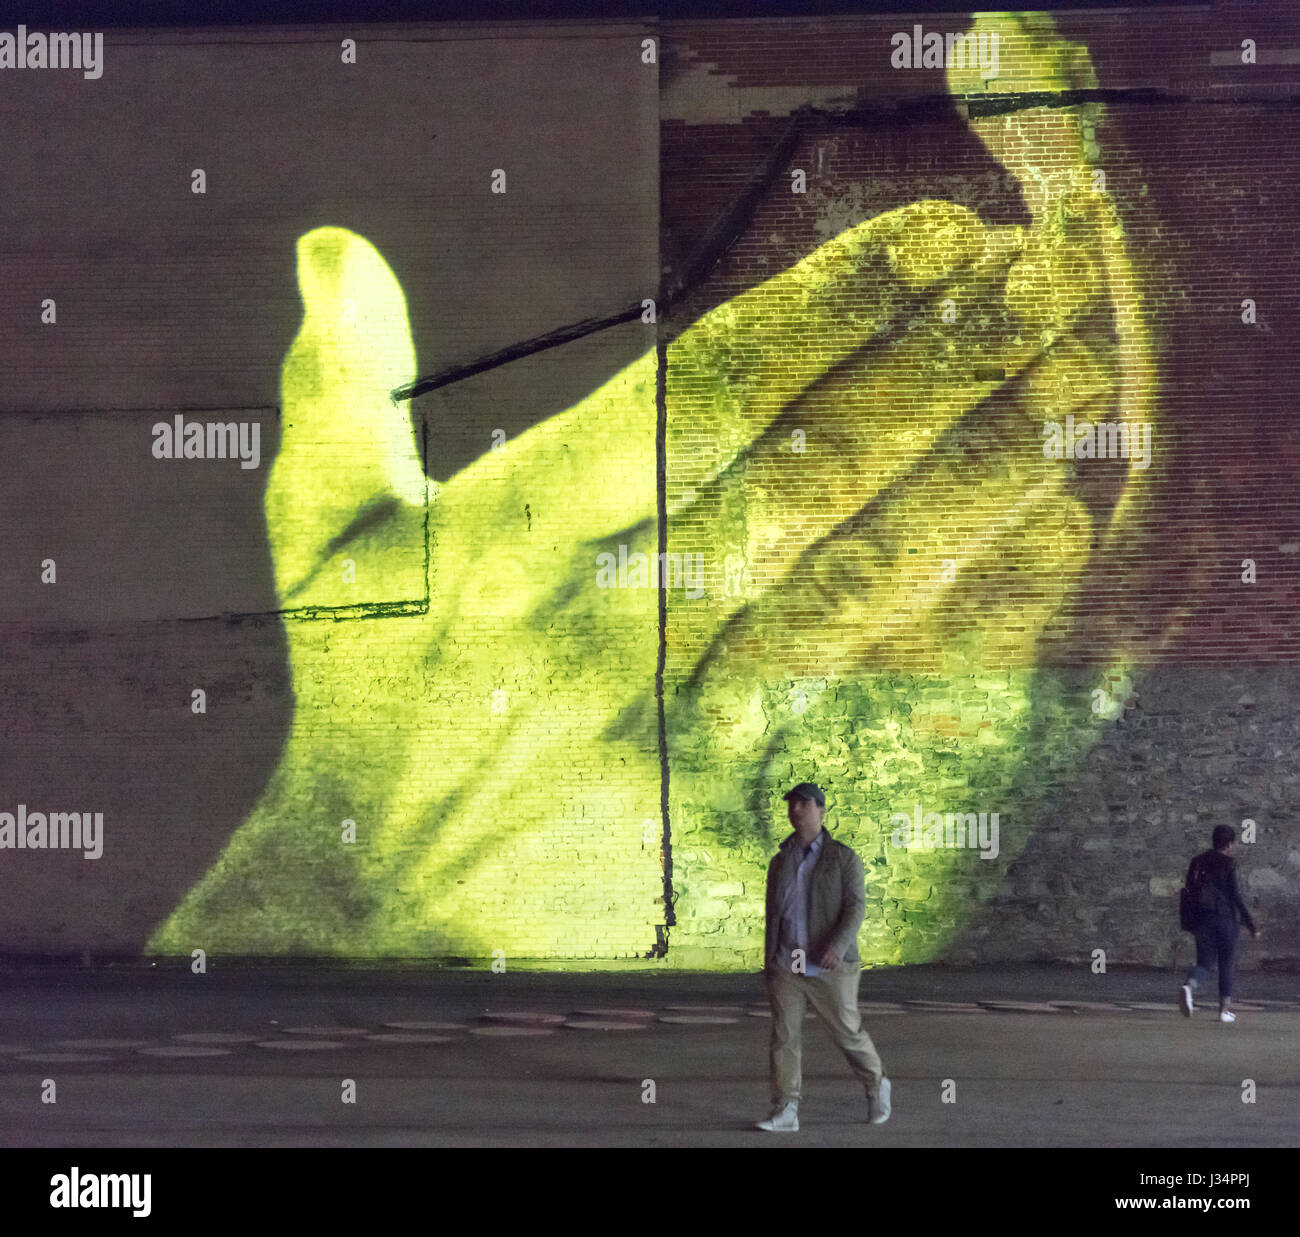 Boulevard St Laurent, Montreal, Quebec, Canada - 27 April 2017: pedestrians walk in front of video of yellow hands projected on brick wall Stock Photo